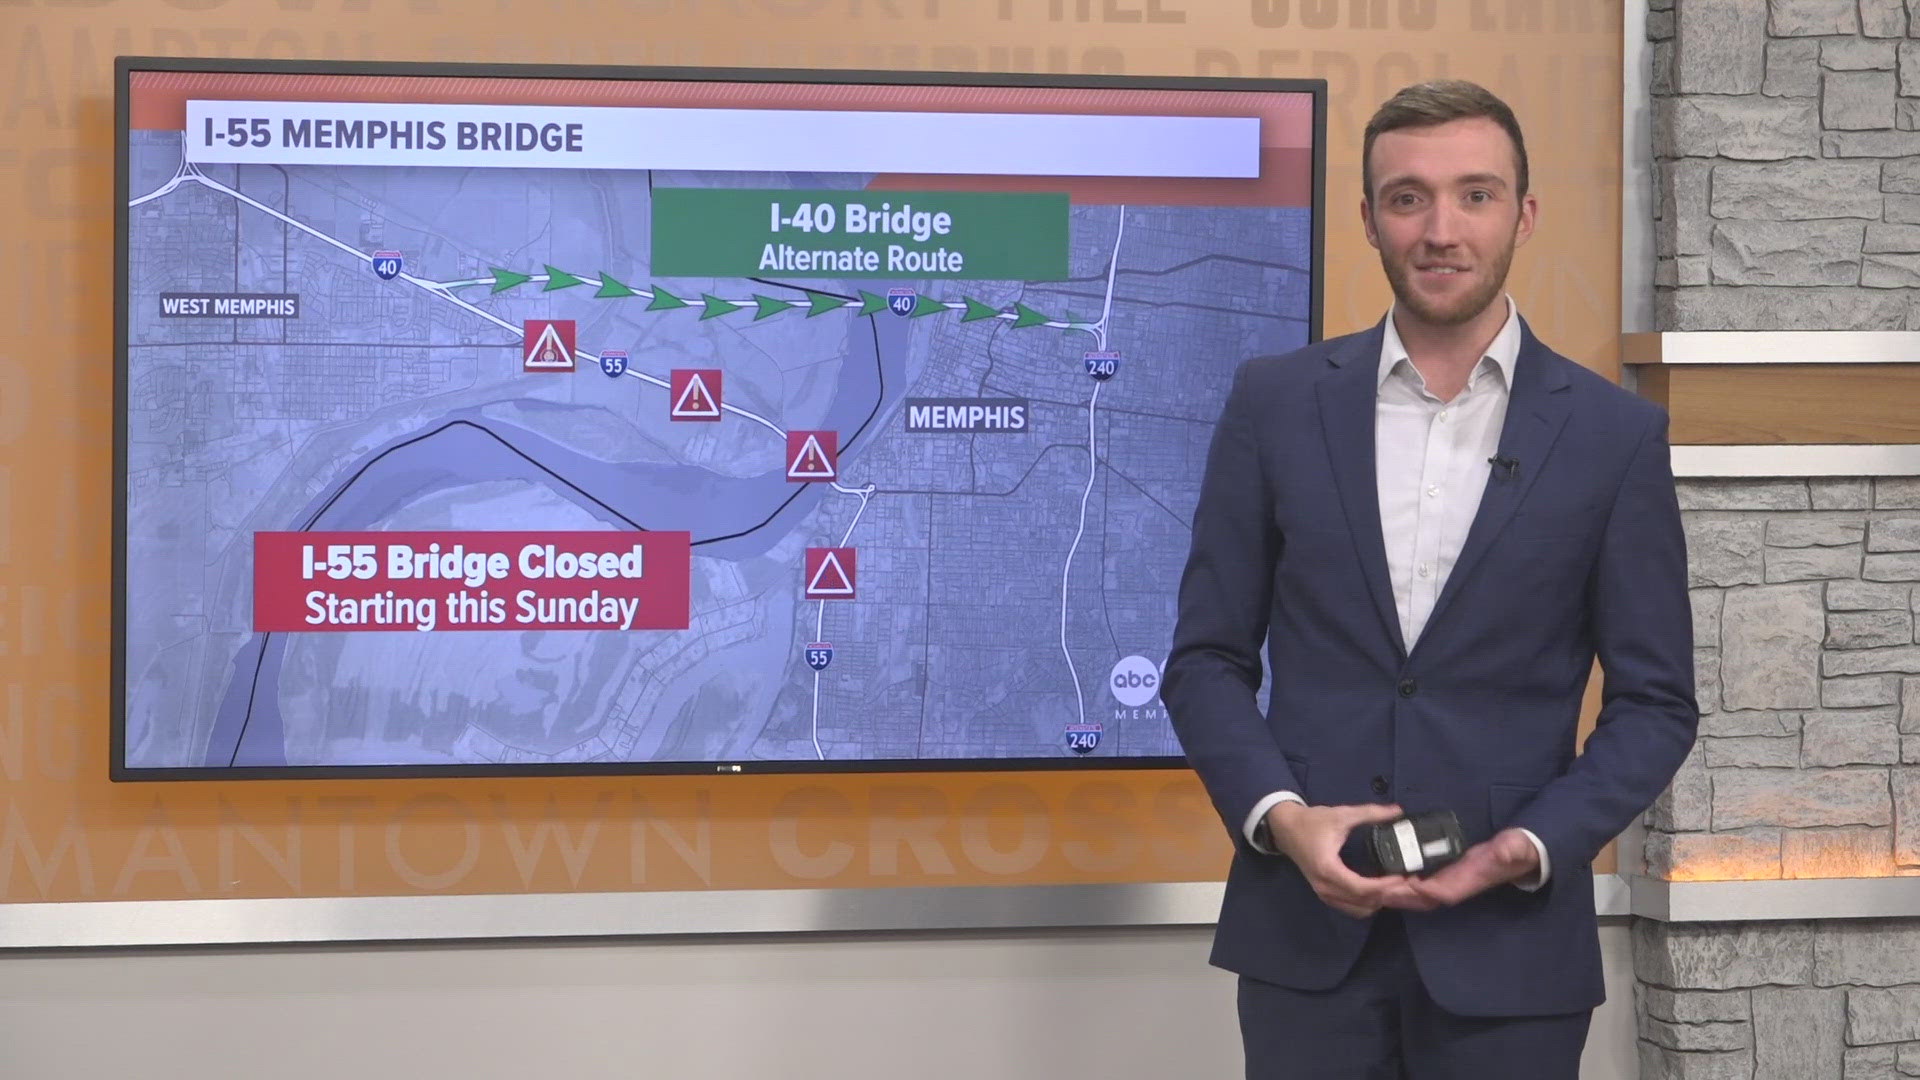 TDOT said the I-55 Bridge over the Mississippi River will close from 8 p.m. on Sunday, June 9 through Sunday, June 23. The only alternate route is the I-40 Bridge.